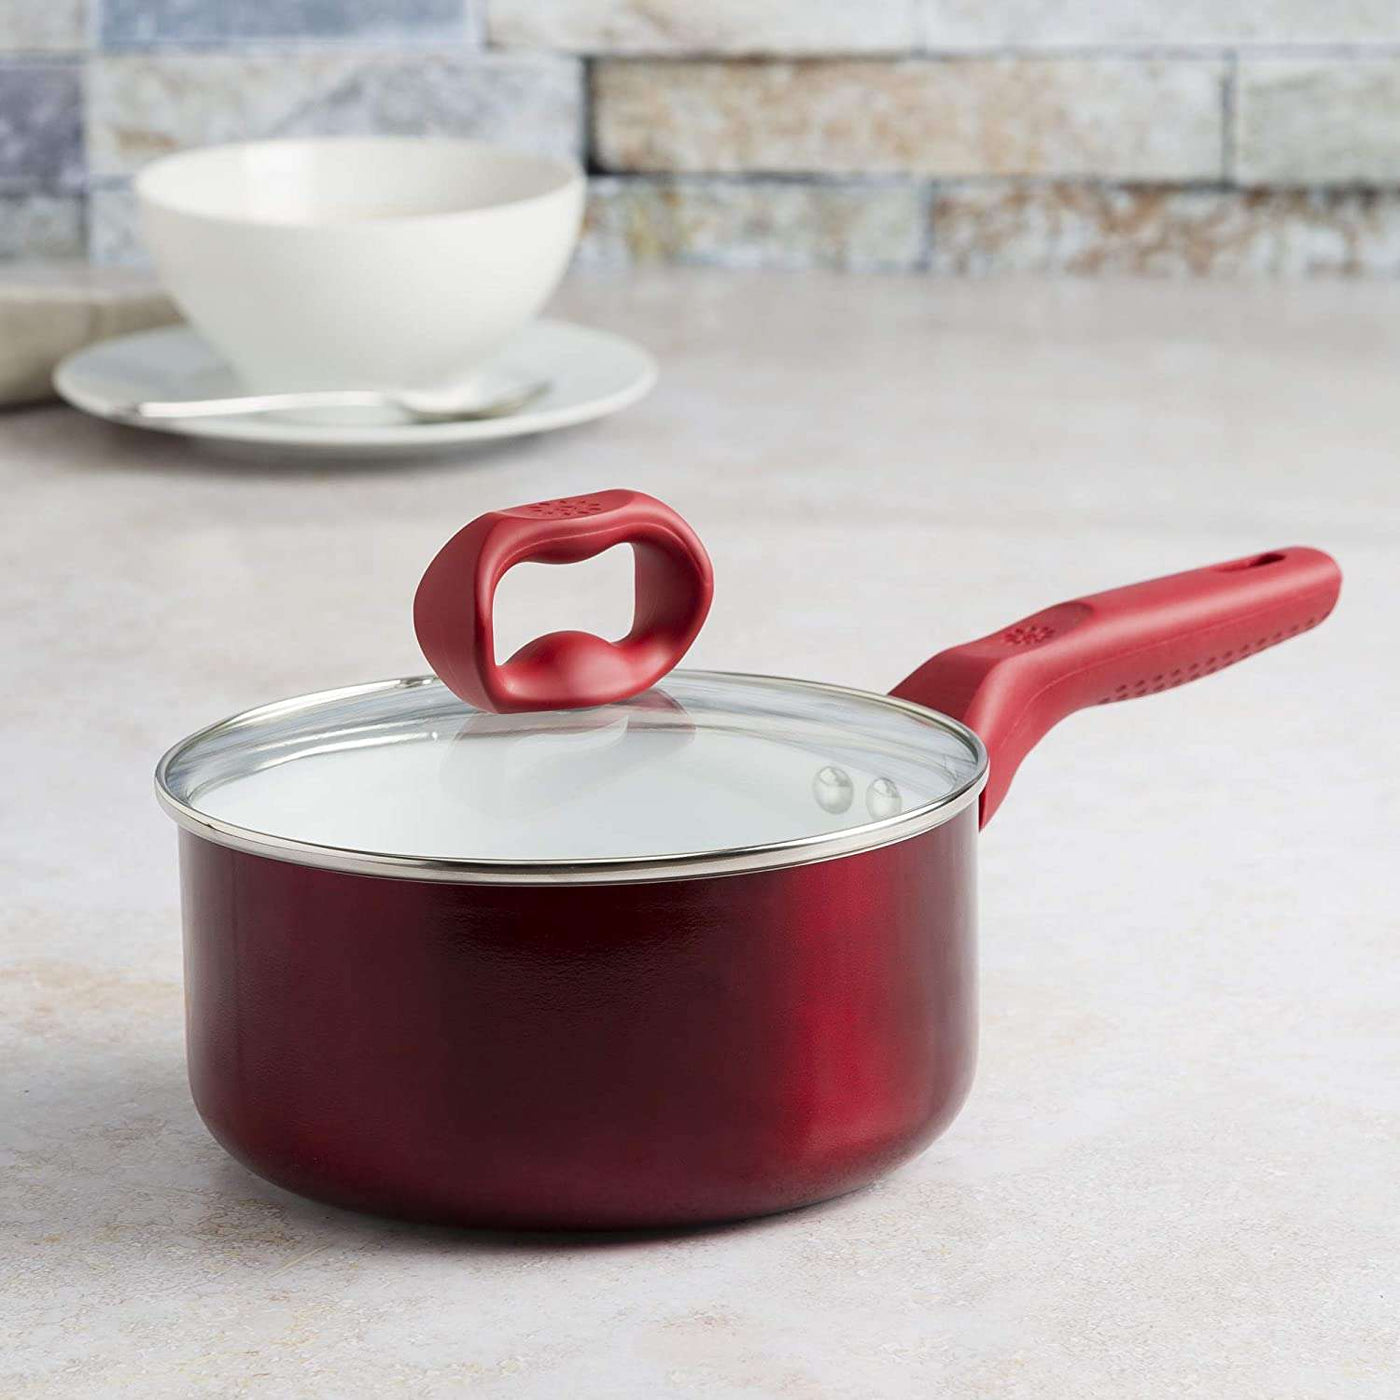 Ecolution Aluminum 8 Bliss Non-Stick Fry Pan - Red